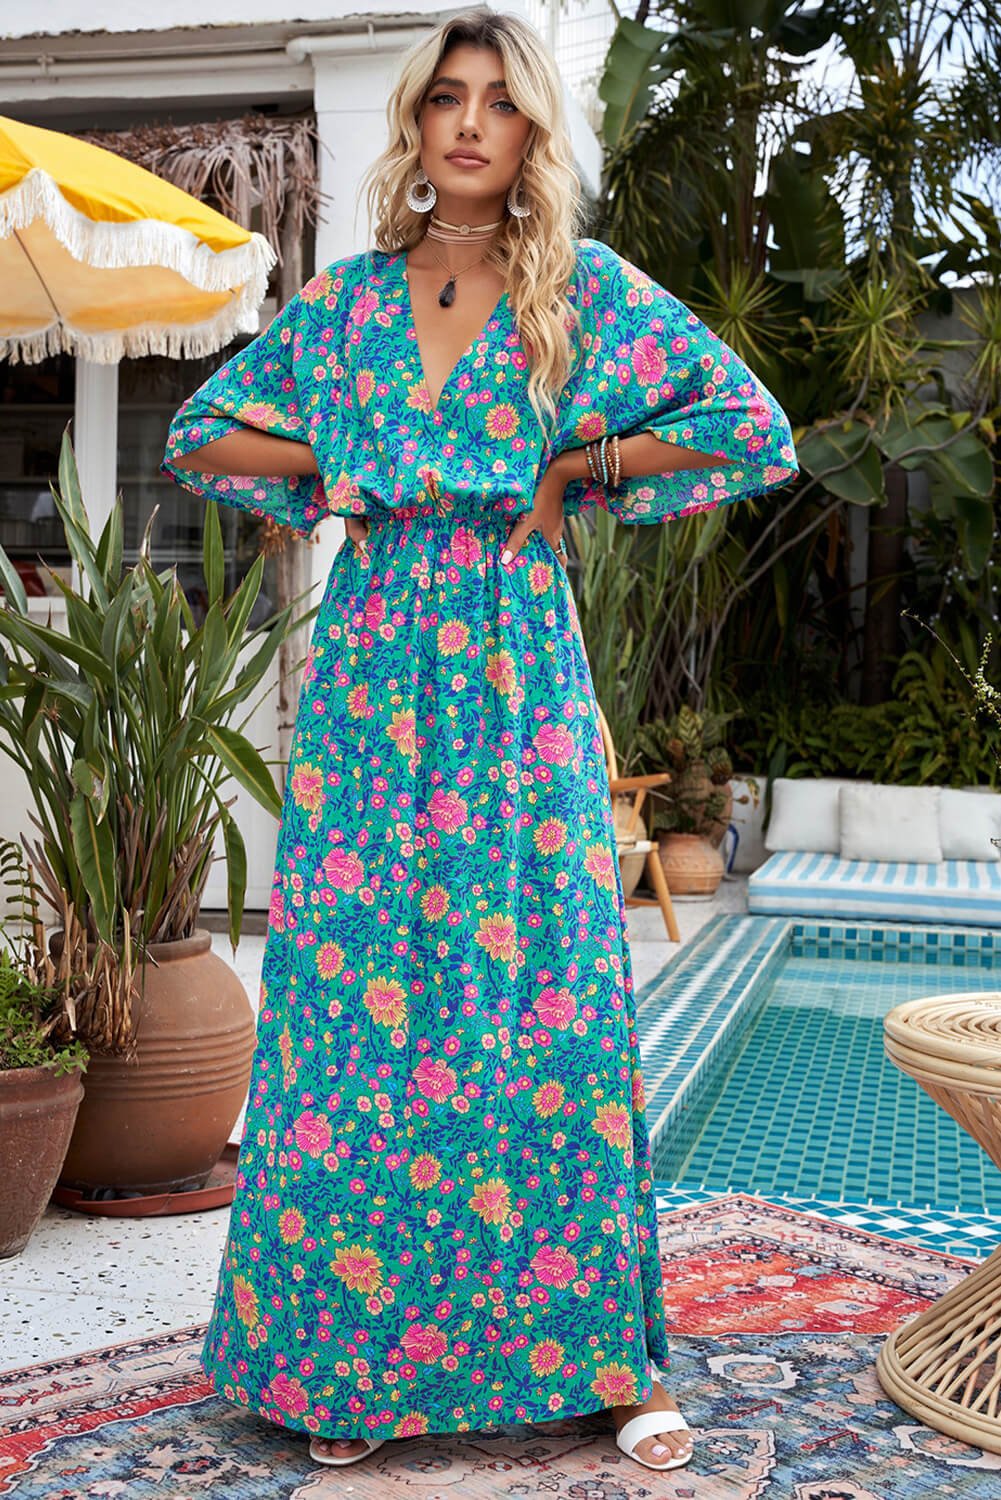 Enchanted Garden Floral Maxi Dress - A Mesmerizing Masterpiece of Timeless Elegance and Romance - Radiate Beauty and Grace with Every Step - Guy Christopher